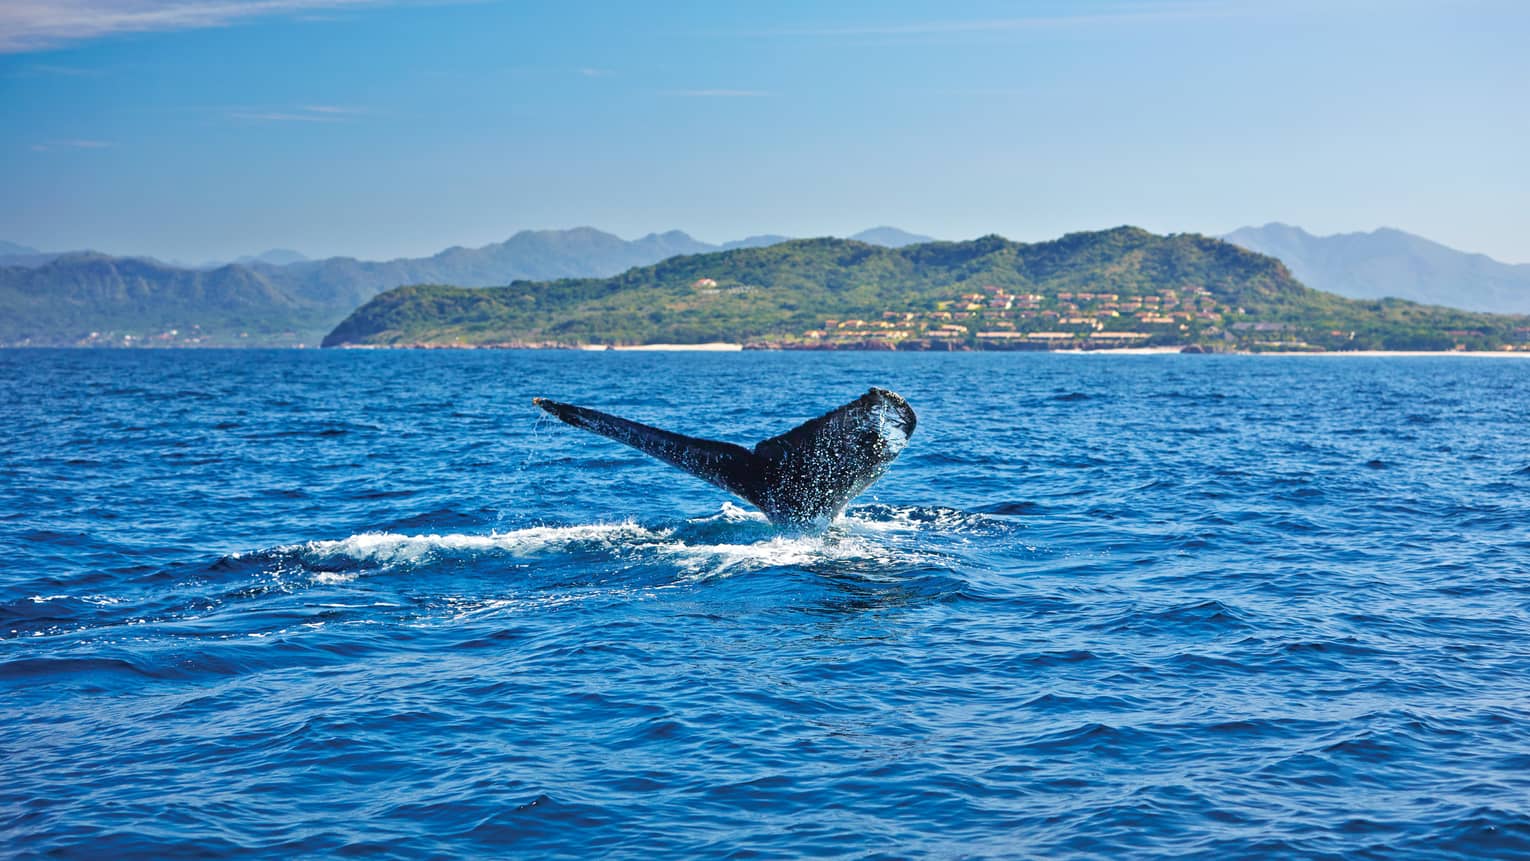 Humpback whale's tail cuts through water on ocean, green shores in background